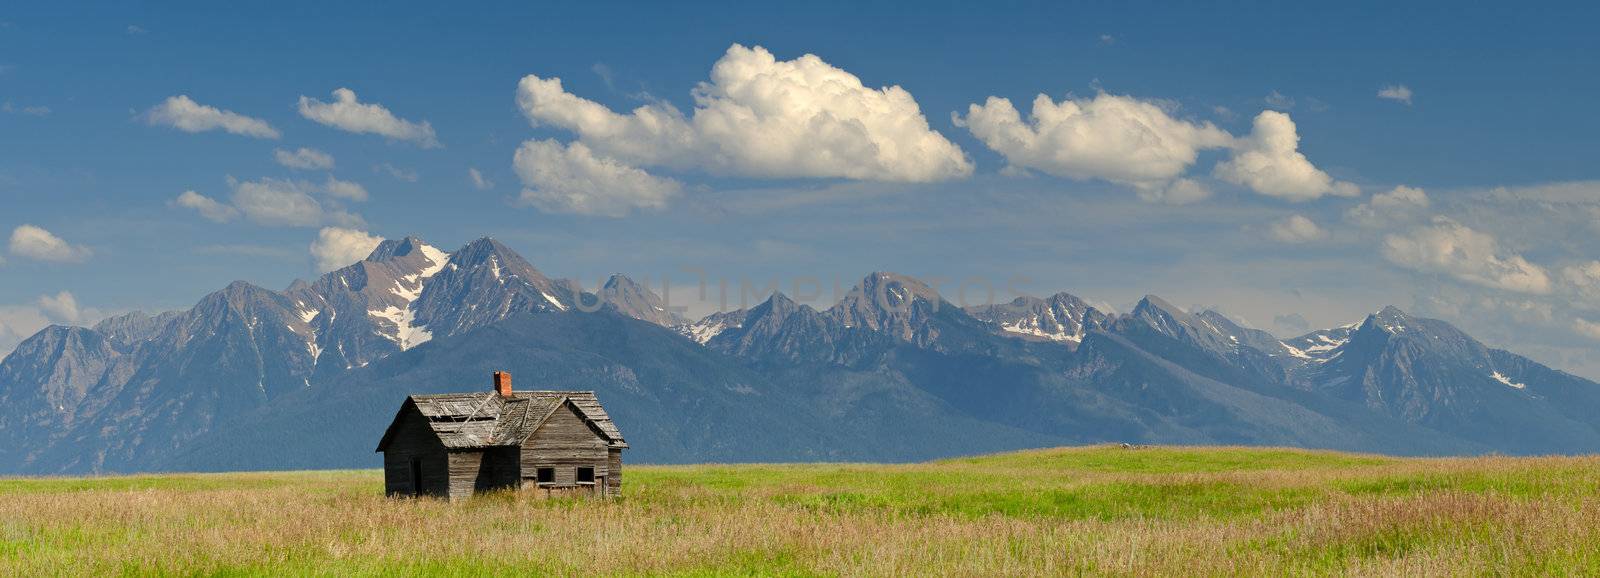 Panorama of an abandoned cabin and the Mission Mountains, Lake County, Montana, USA by CharlesBolin